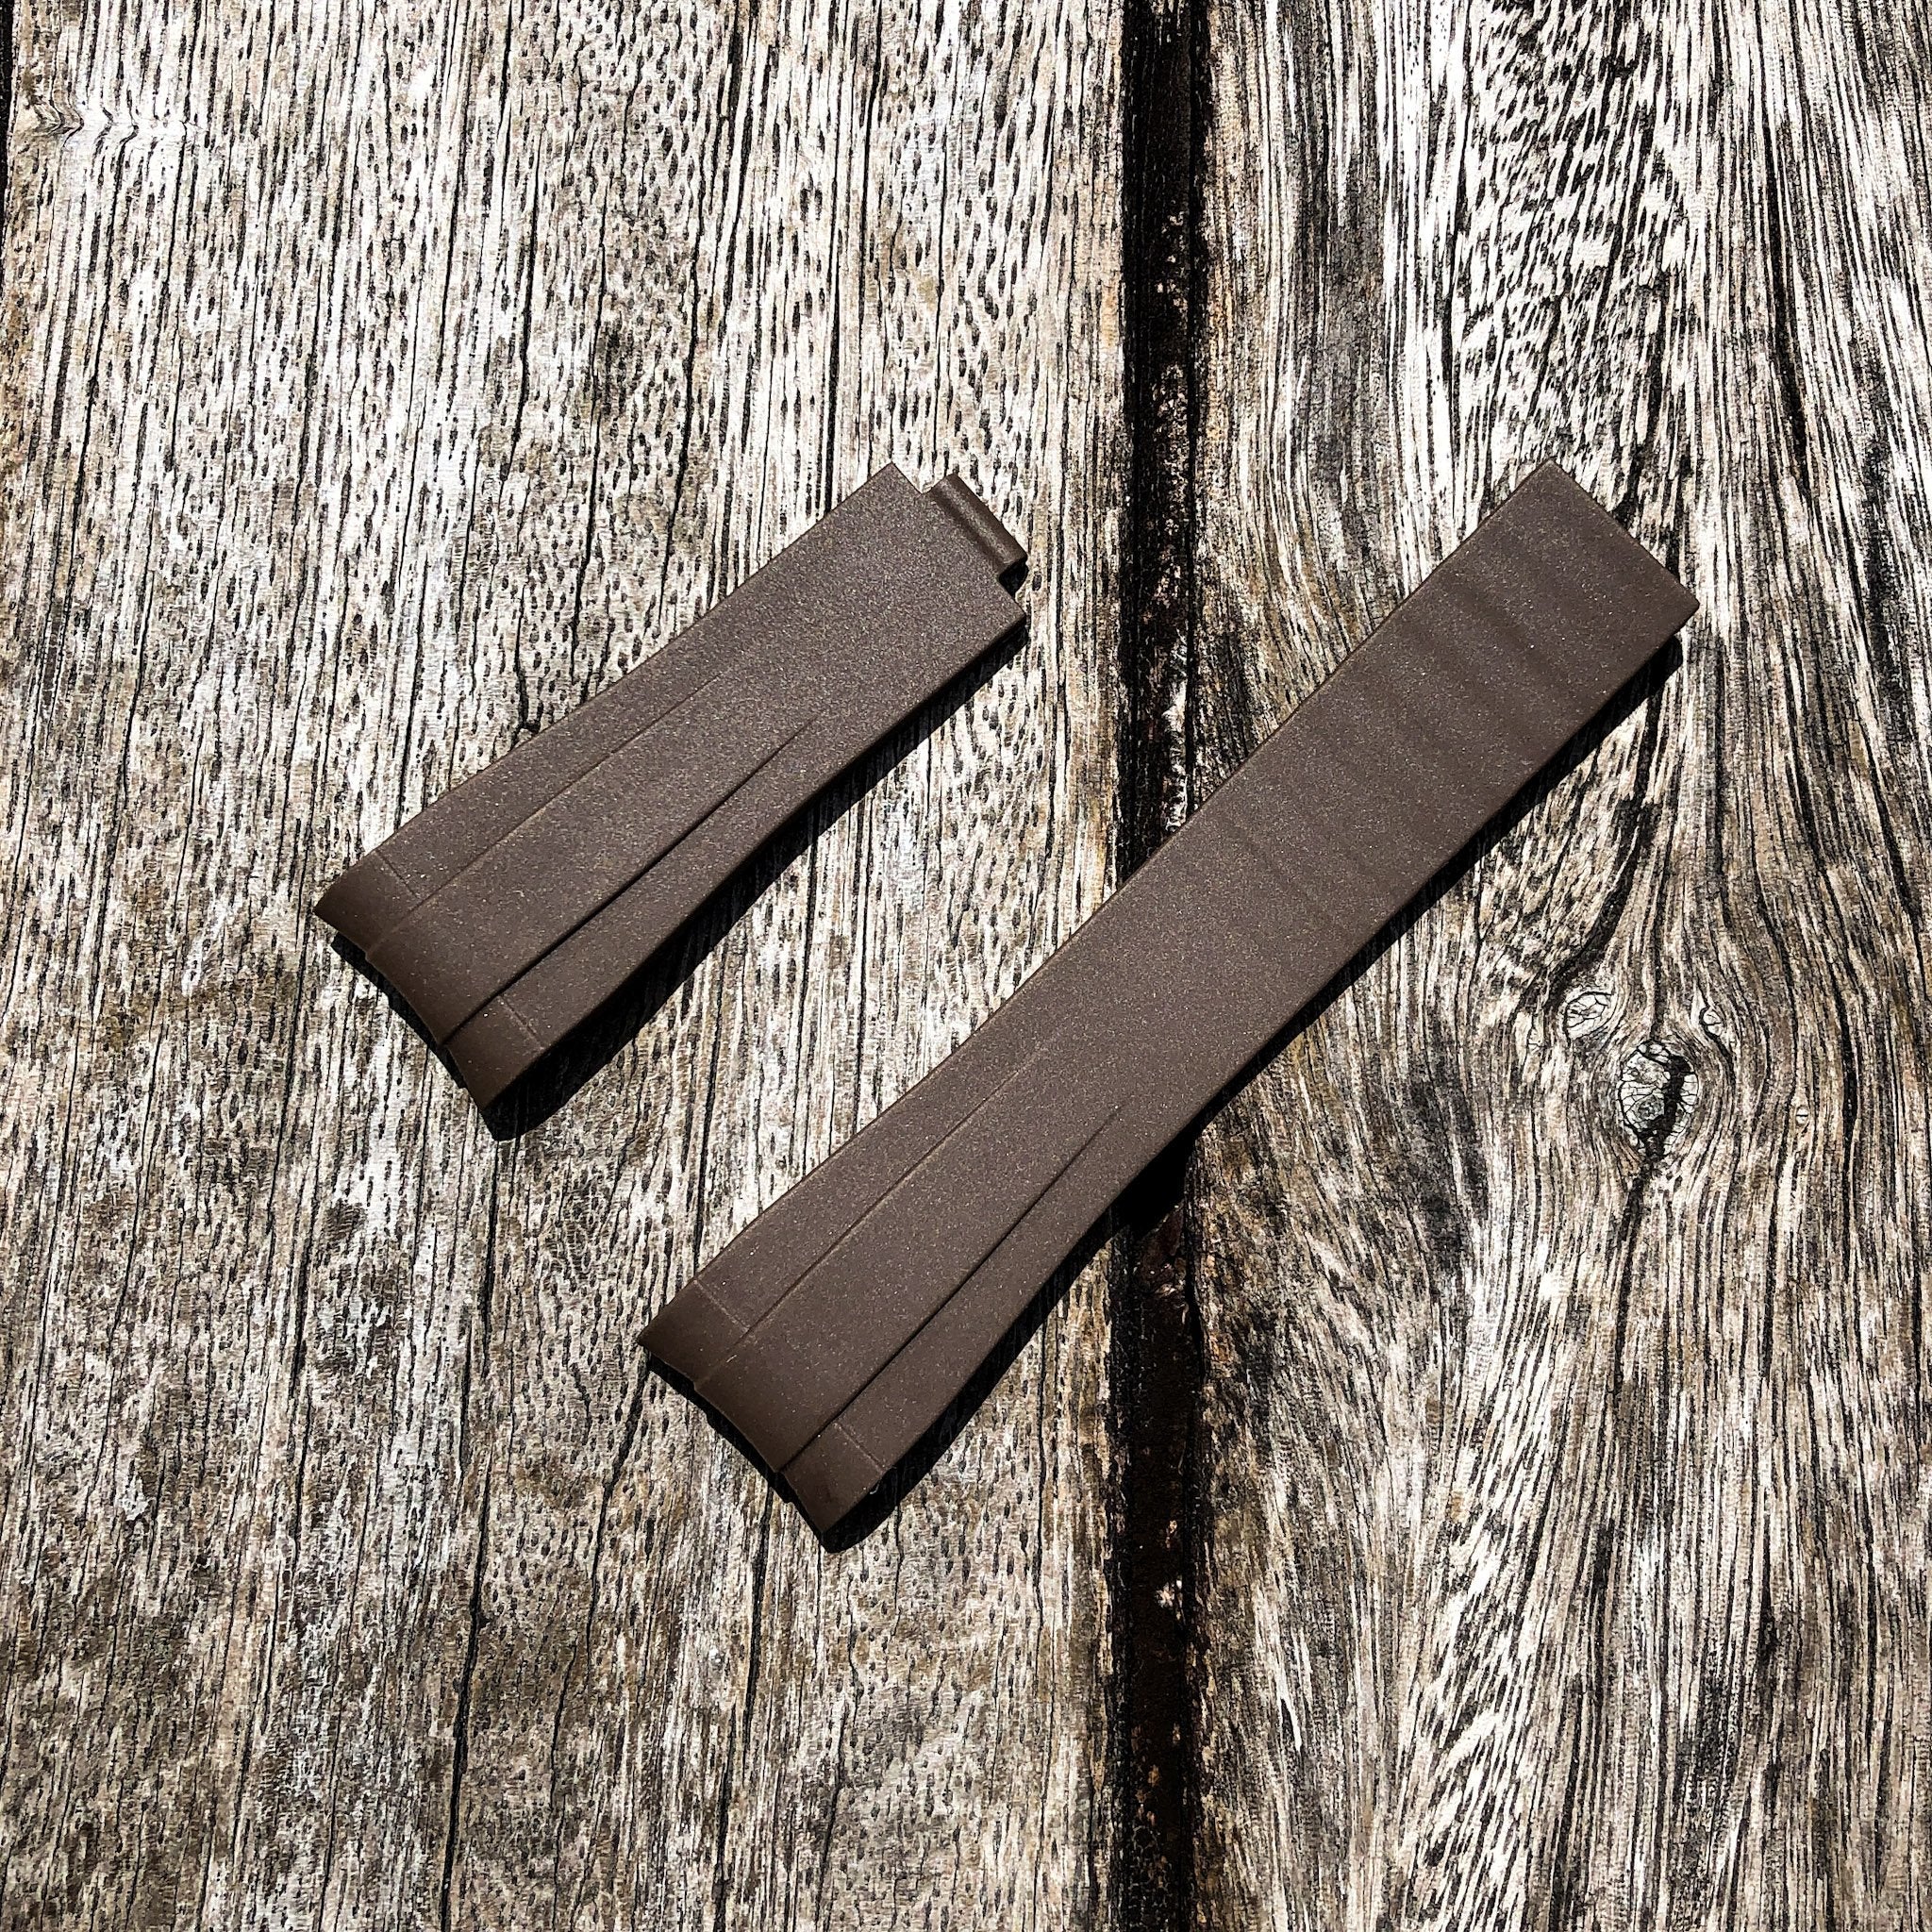 Aqua Series | Brown Rubber Watch Strap For Rolex with Curved End - Samurai Vintage Co.